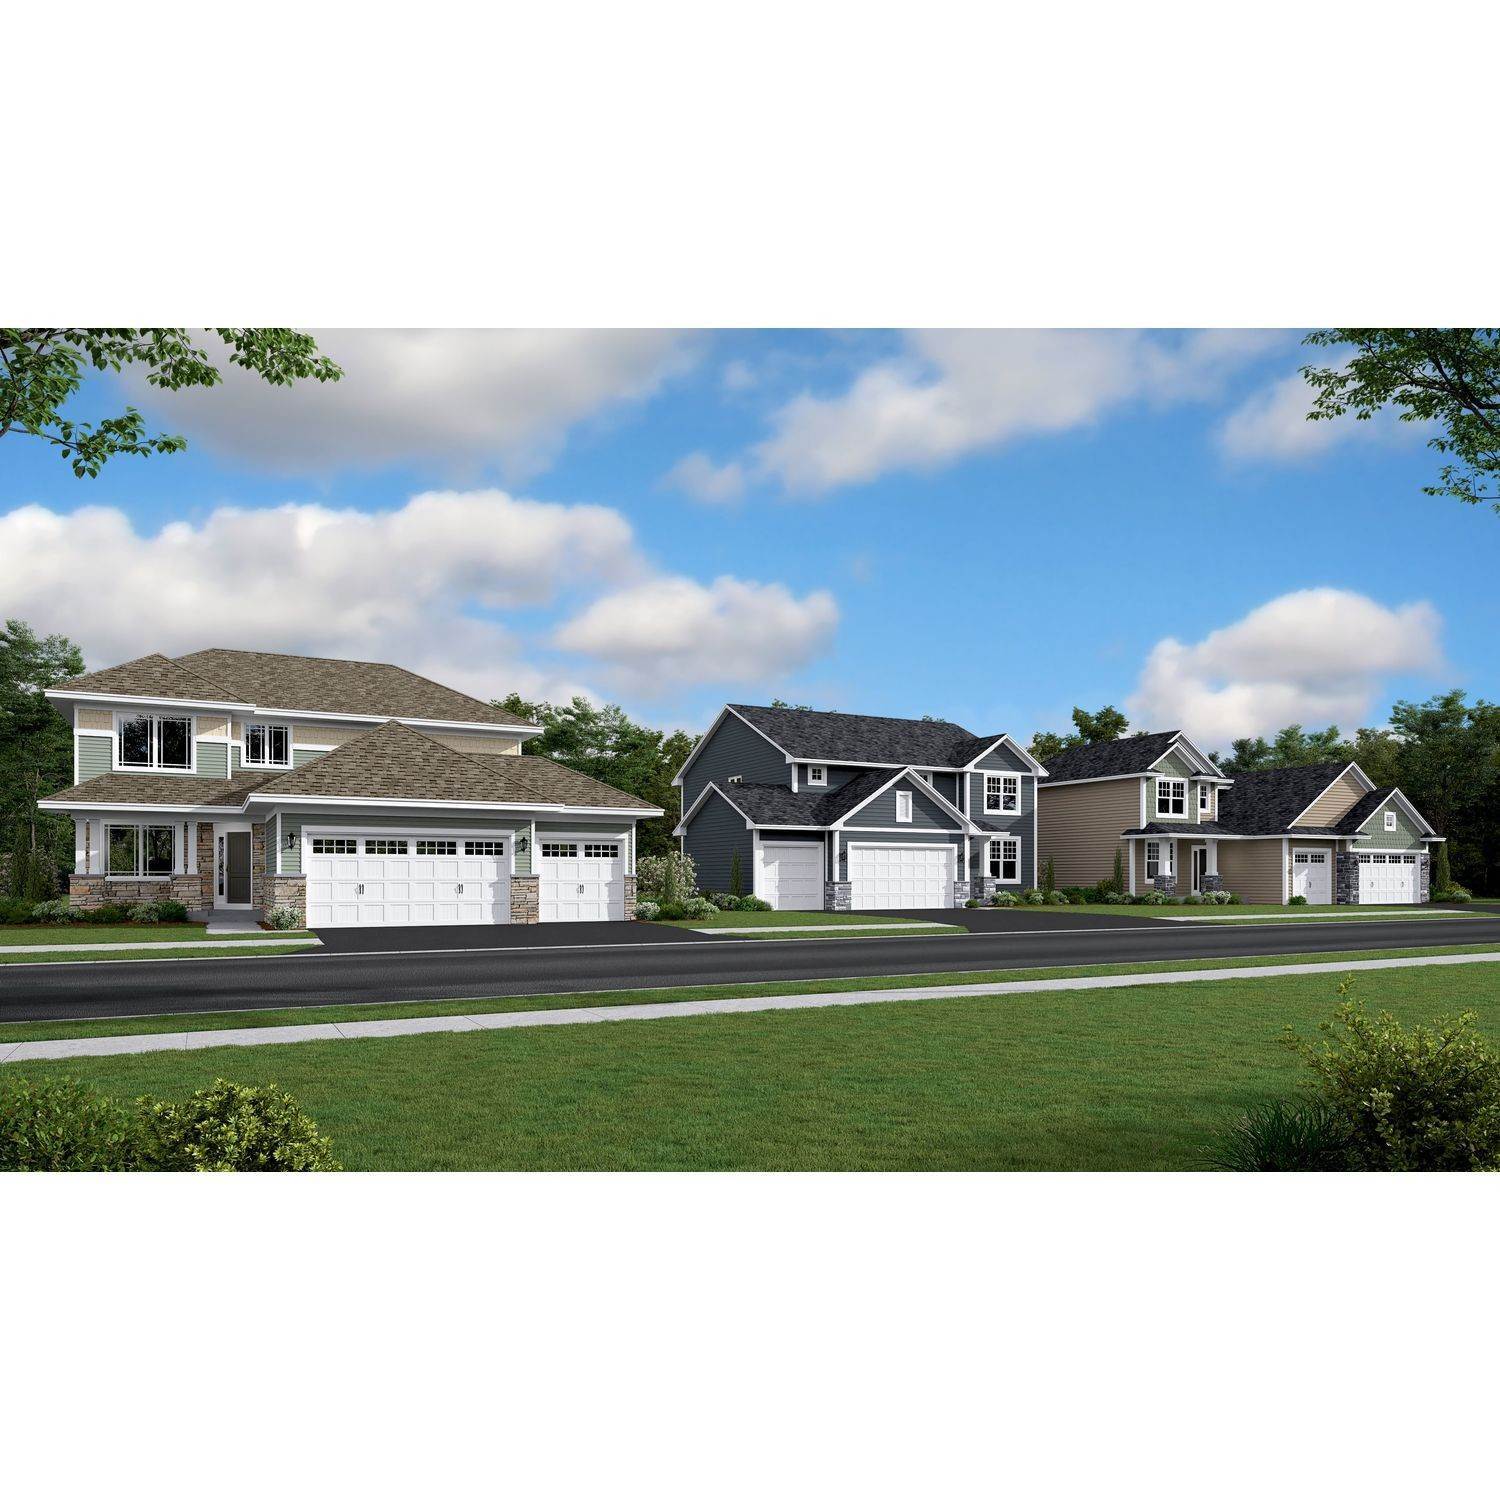 5. River Pointe - The Meadows of River Pointe gebouw op 17754 54th St NE, Otsego, MN 55374